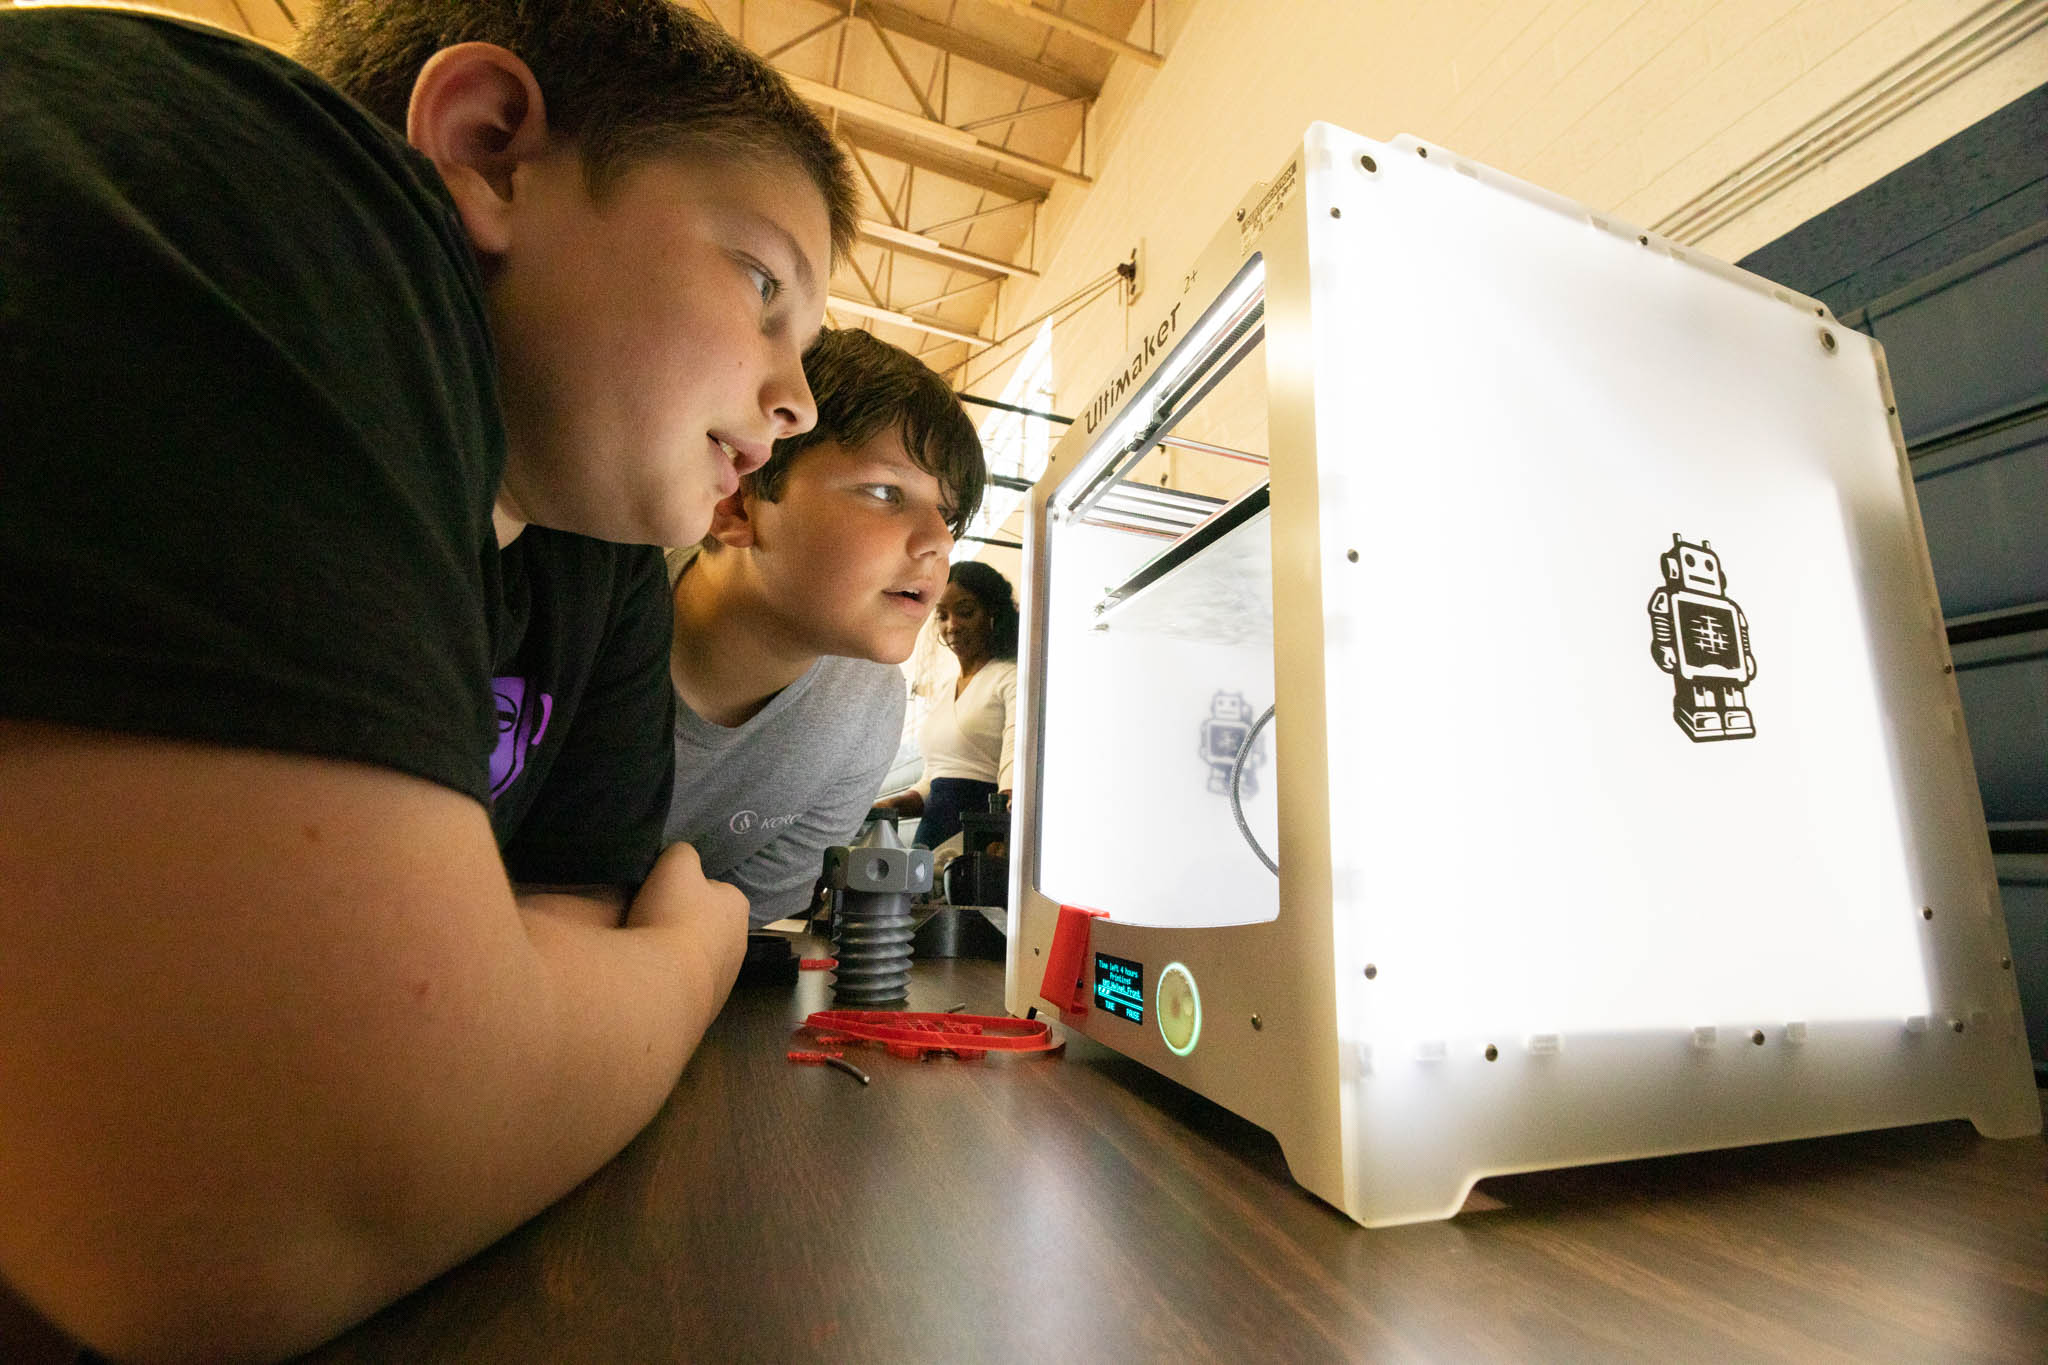 Two young boy students get up close to look at a 3D printer in action.